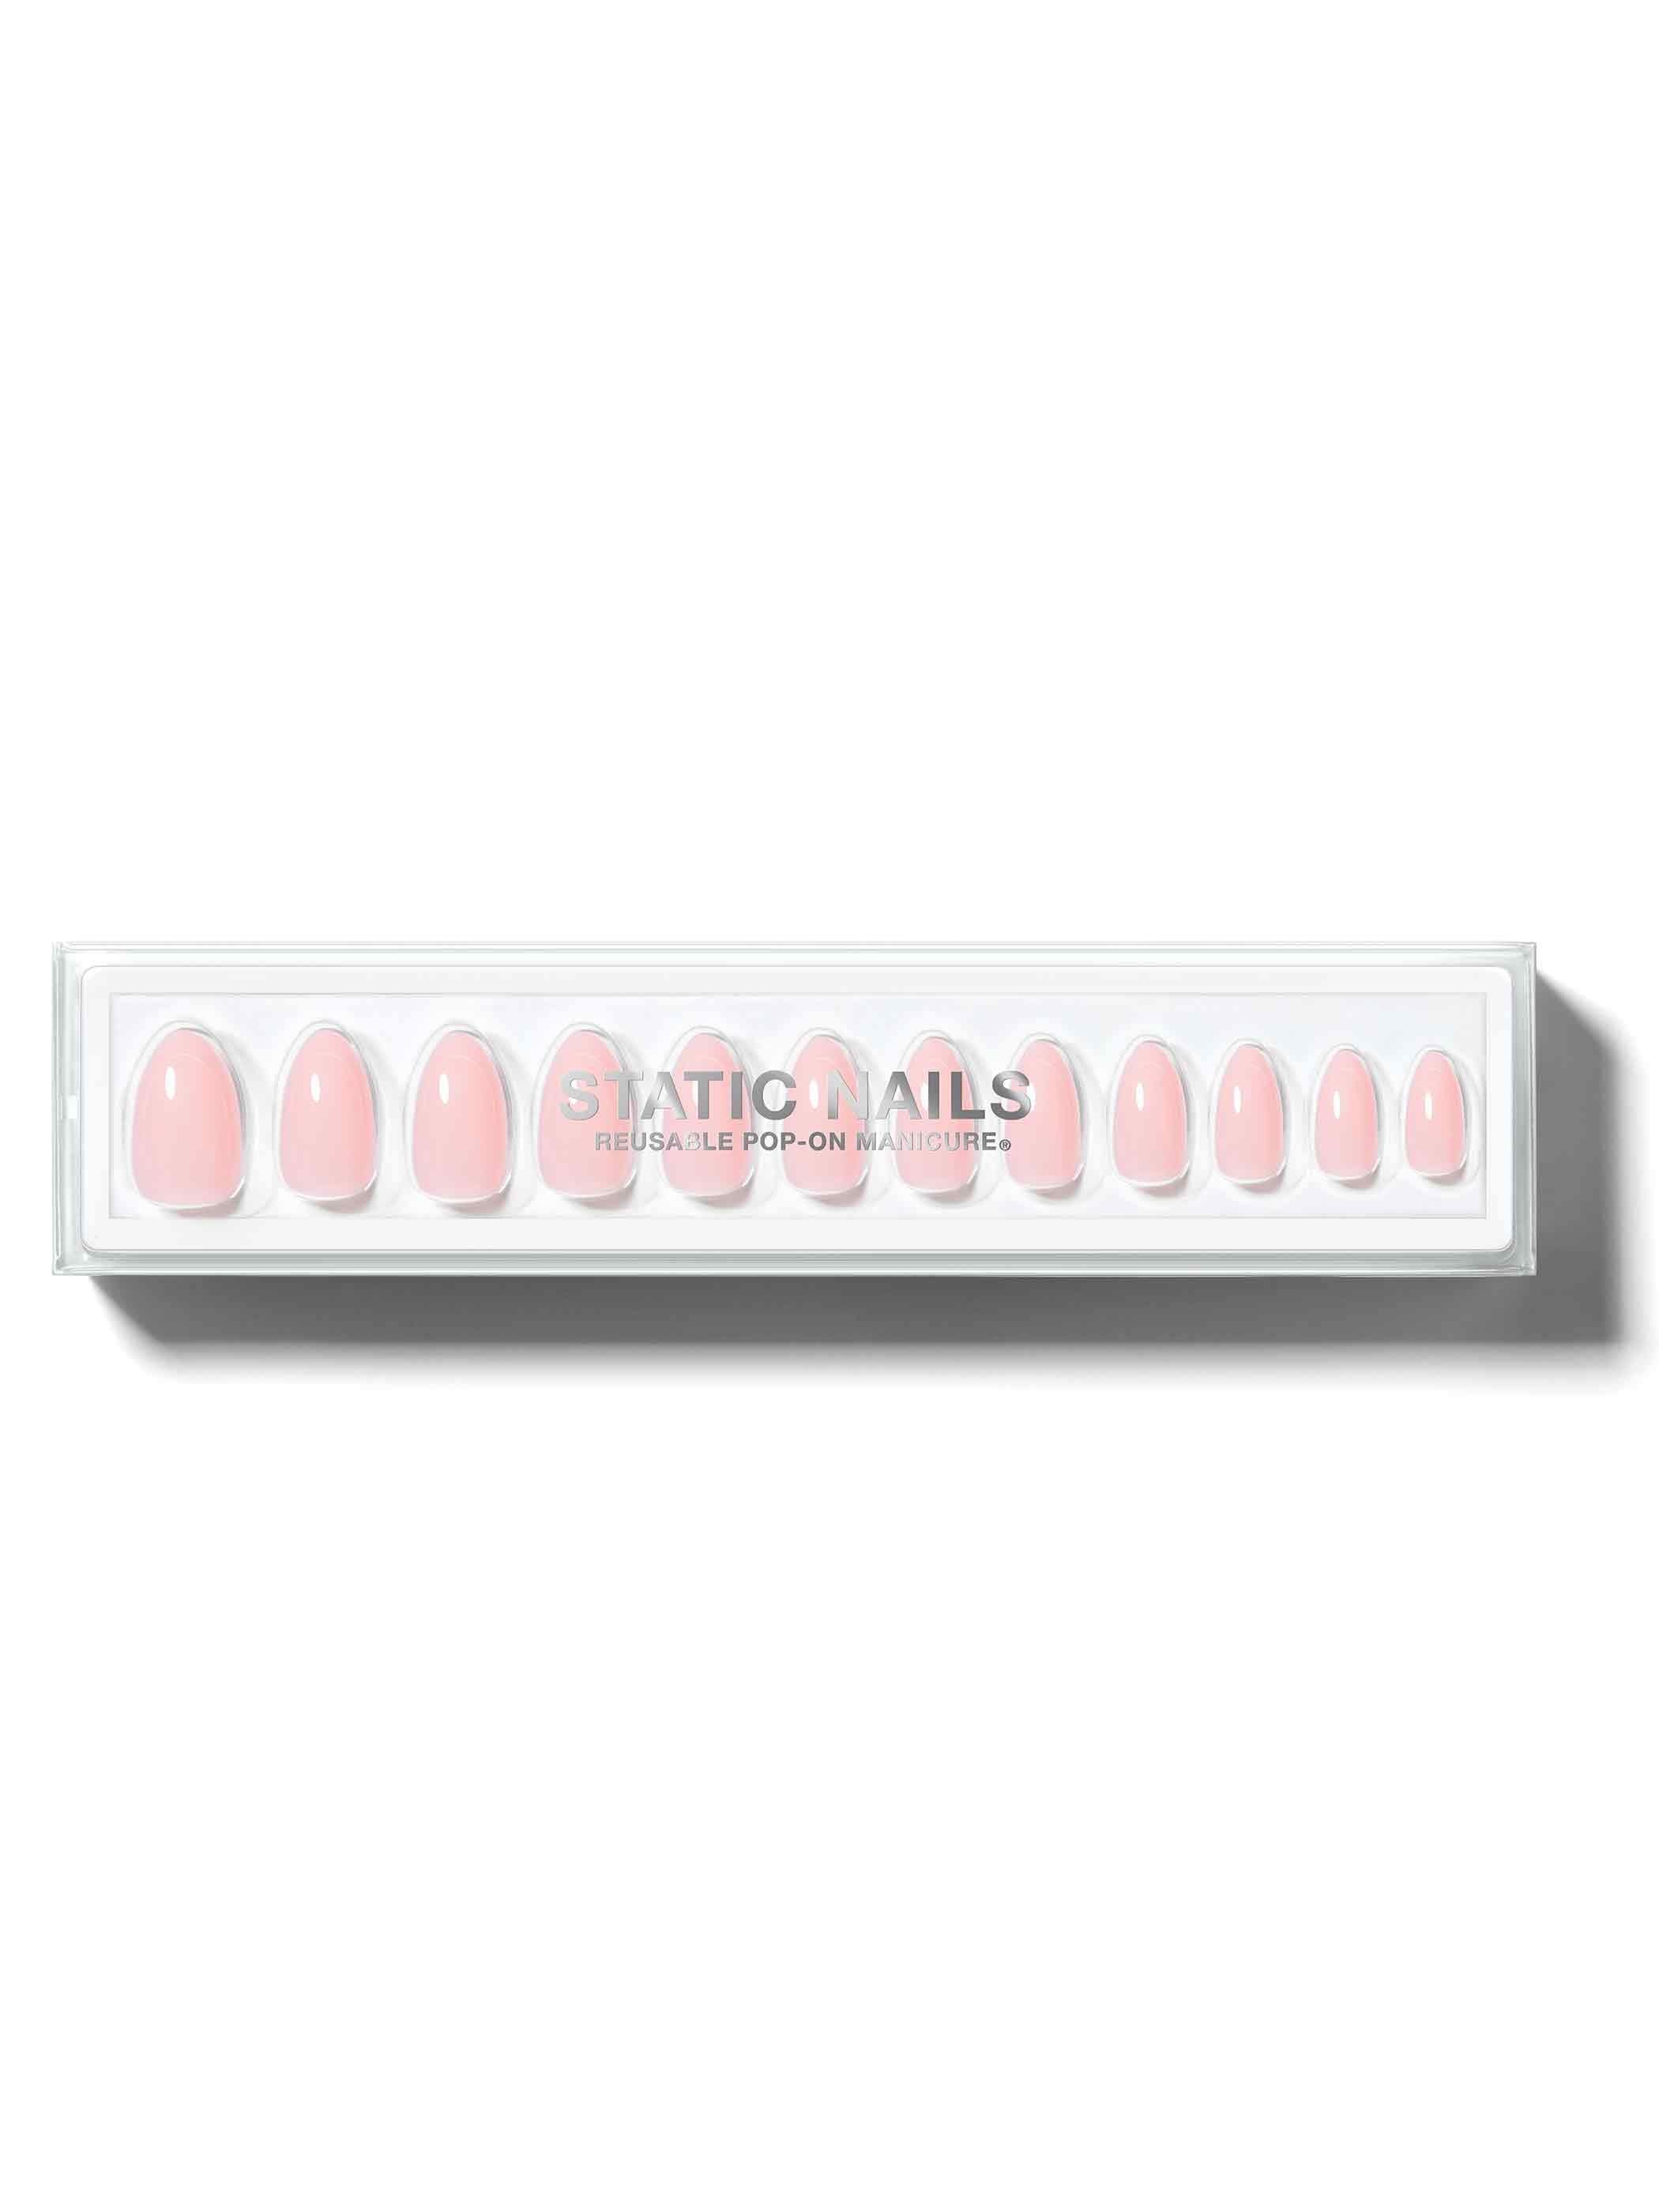 Multi Award-Winning Reusable Pop-On Manicures® in Delicate Pink Short  Almond – STATIC NAILS